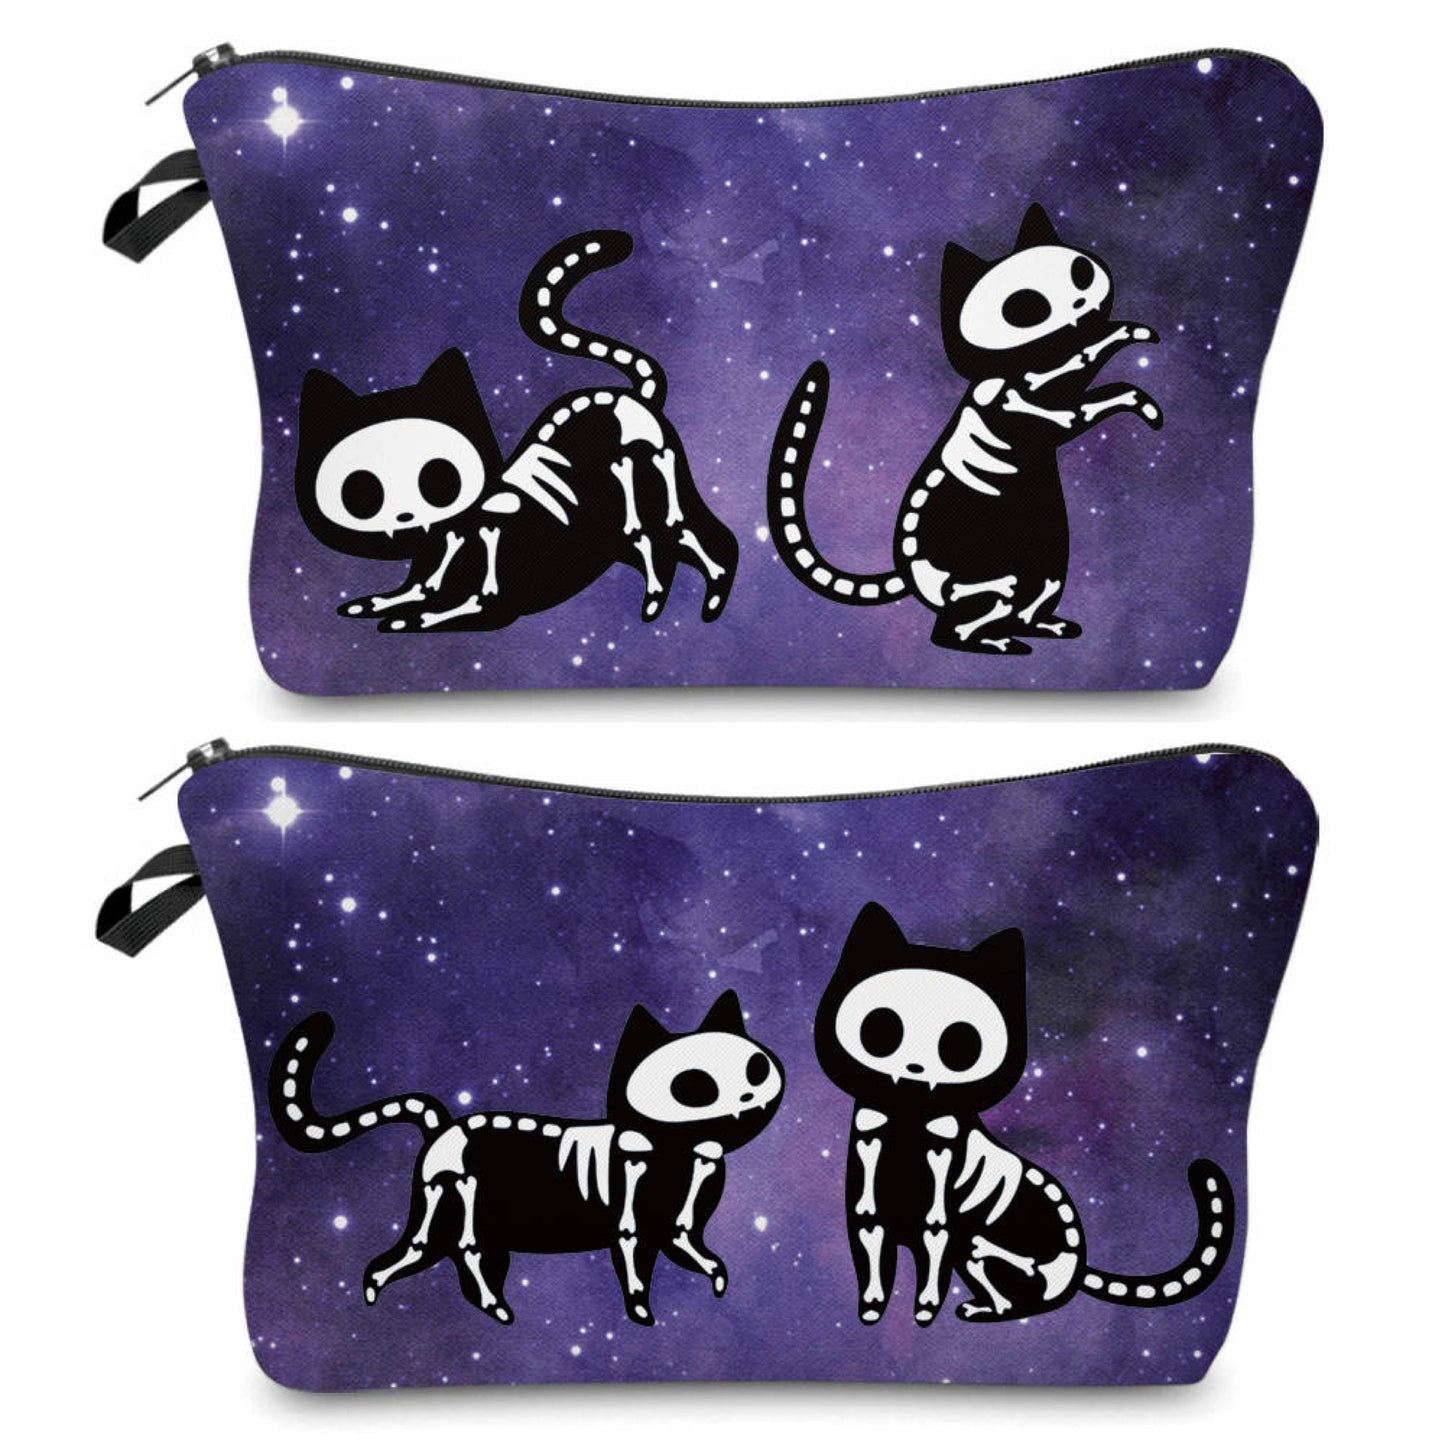 Skeleton Cat - Water-Resistant Multi-Use Pouch